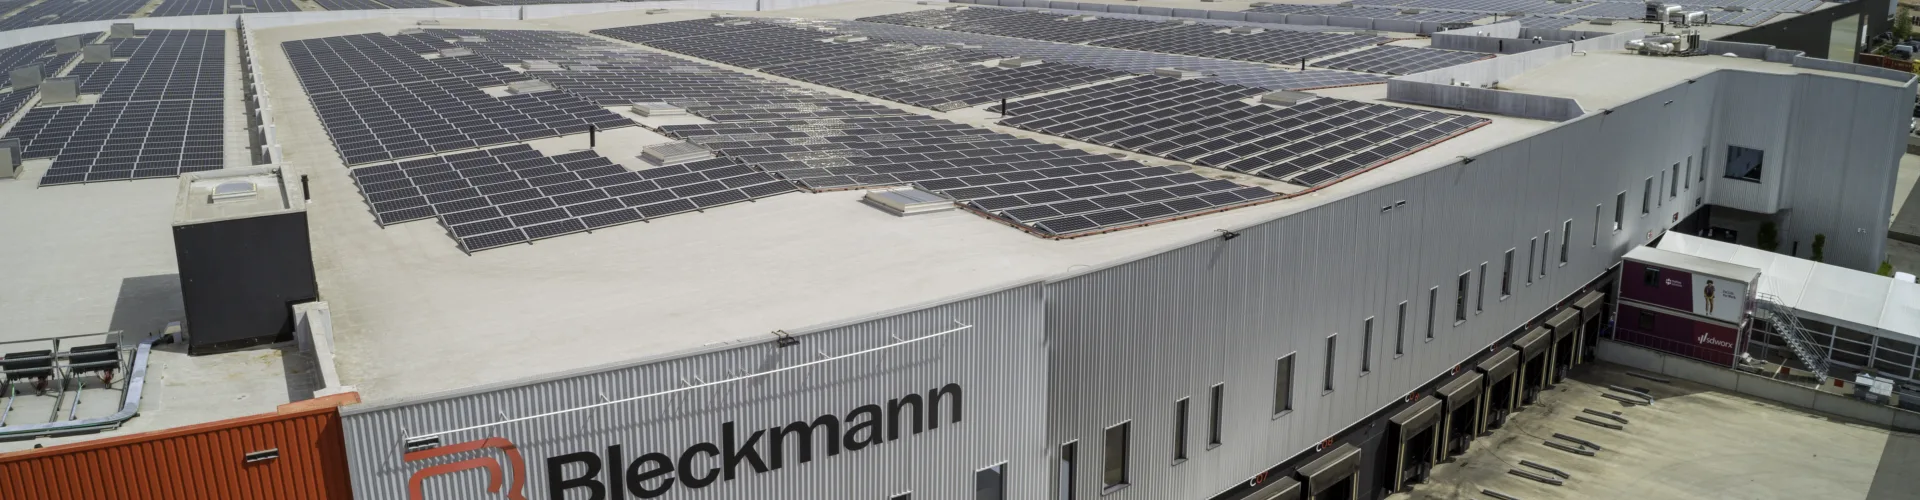 Bleckmann expands in Belgium with 60,000 sq m in three strategic…